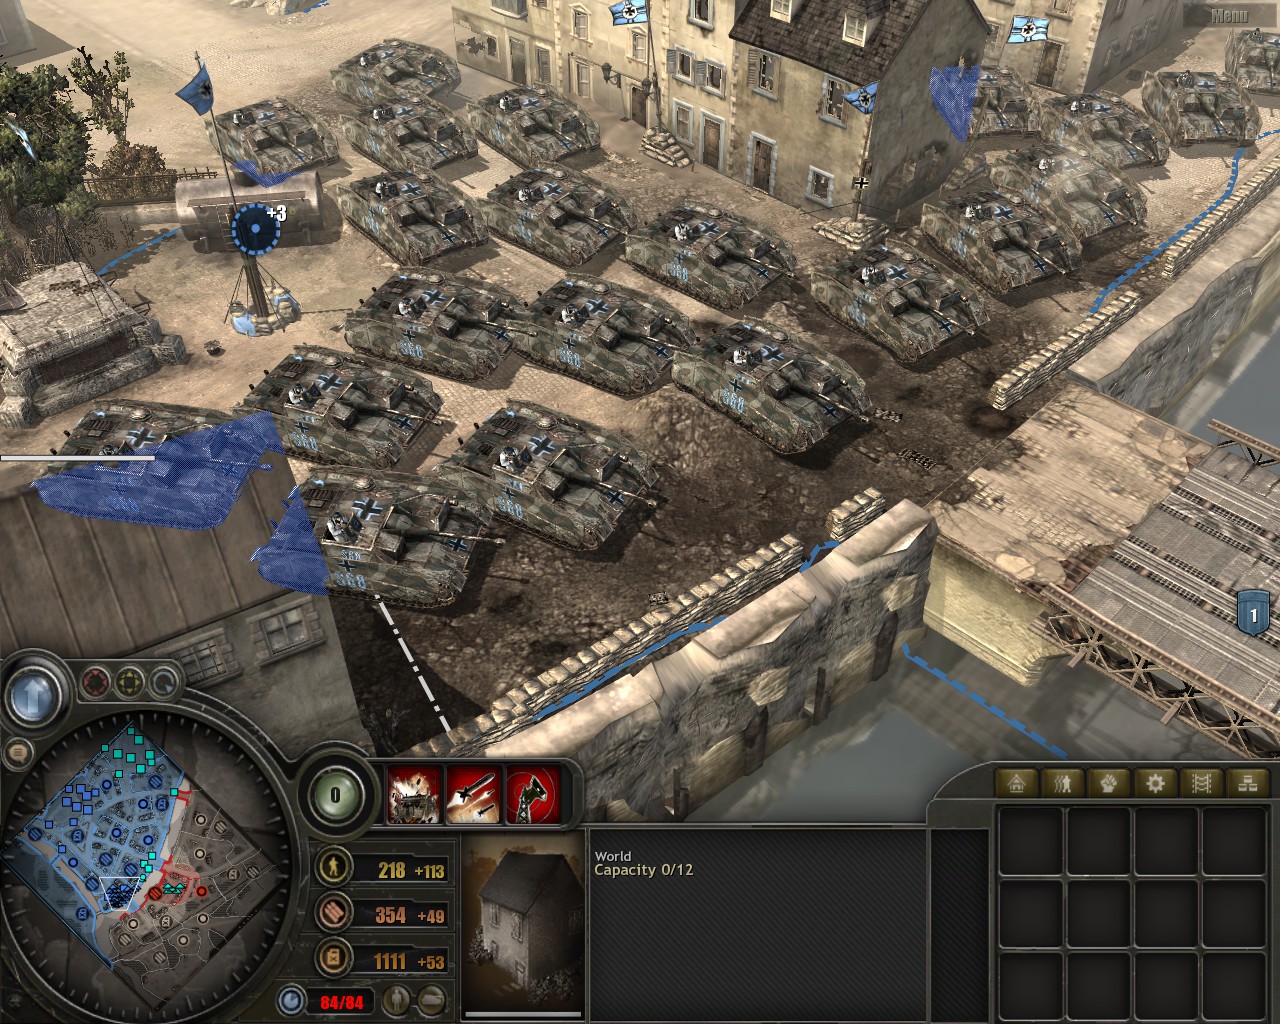 company of heroes legacy edition difference